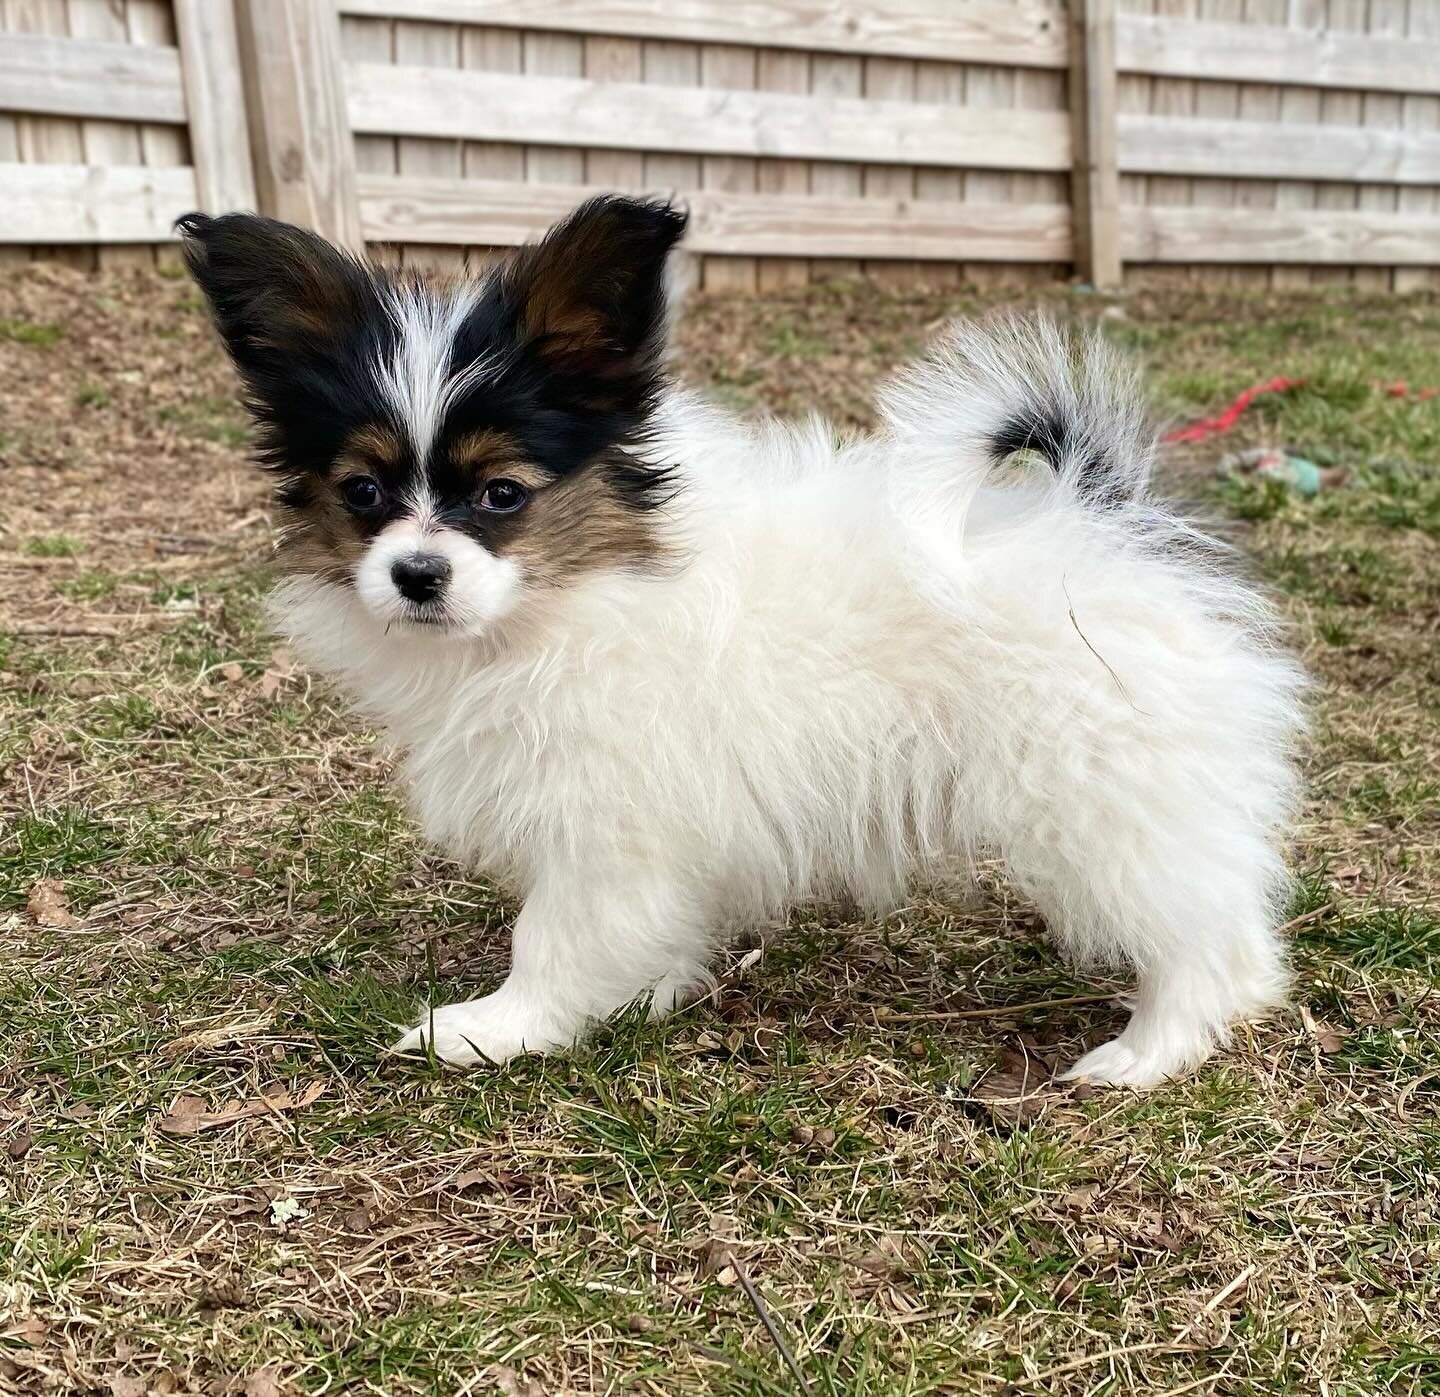 Pallavi, staying here for now :) #papillon #papillons #papillonsofinstagram #papillonlove #papillondog #papillonpuppies #papillonpuppy #puppiesofinstagram #puppiesofig #puppylove #pupper #sablewings